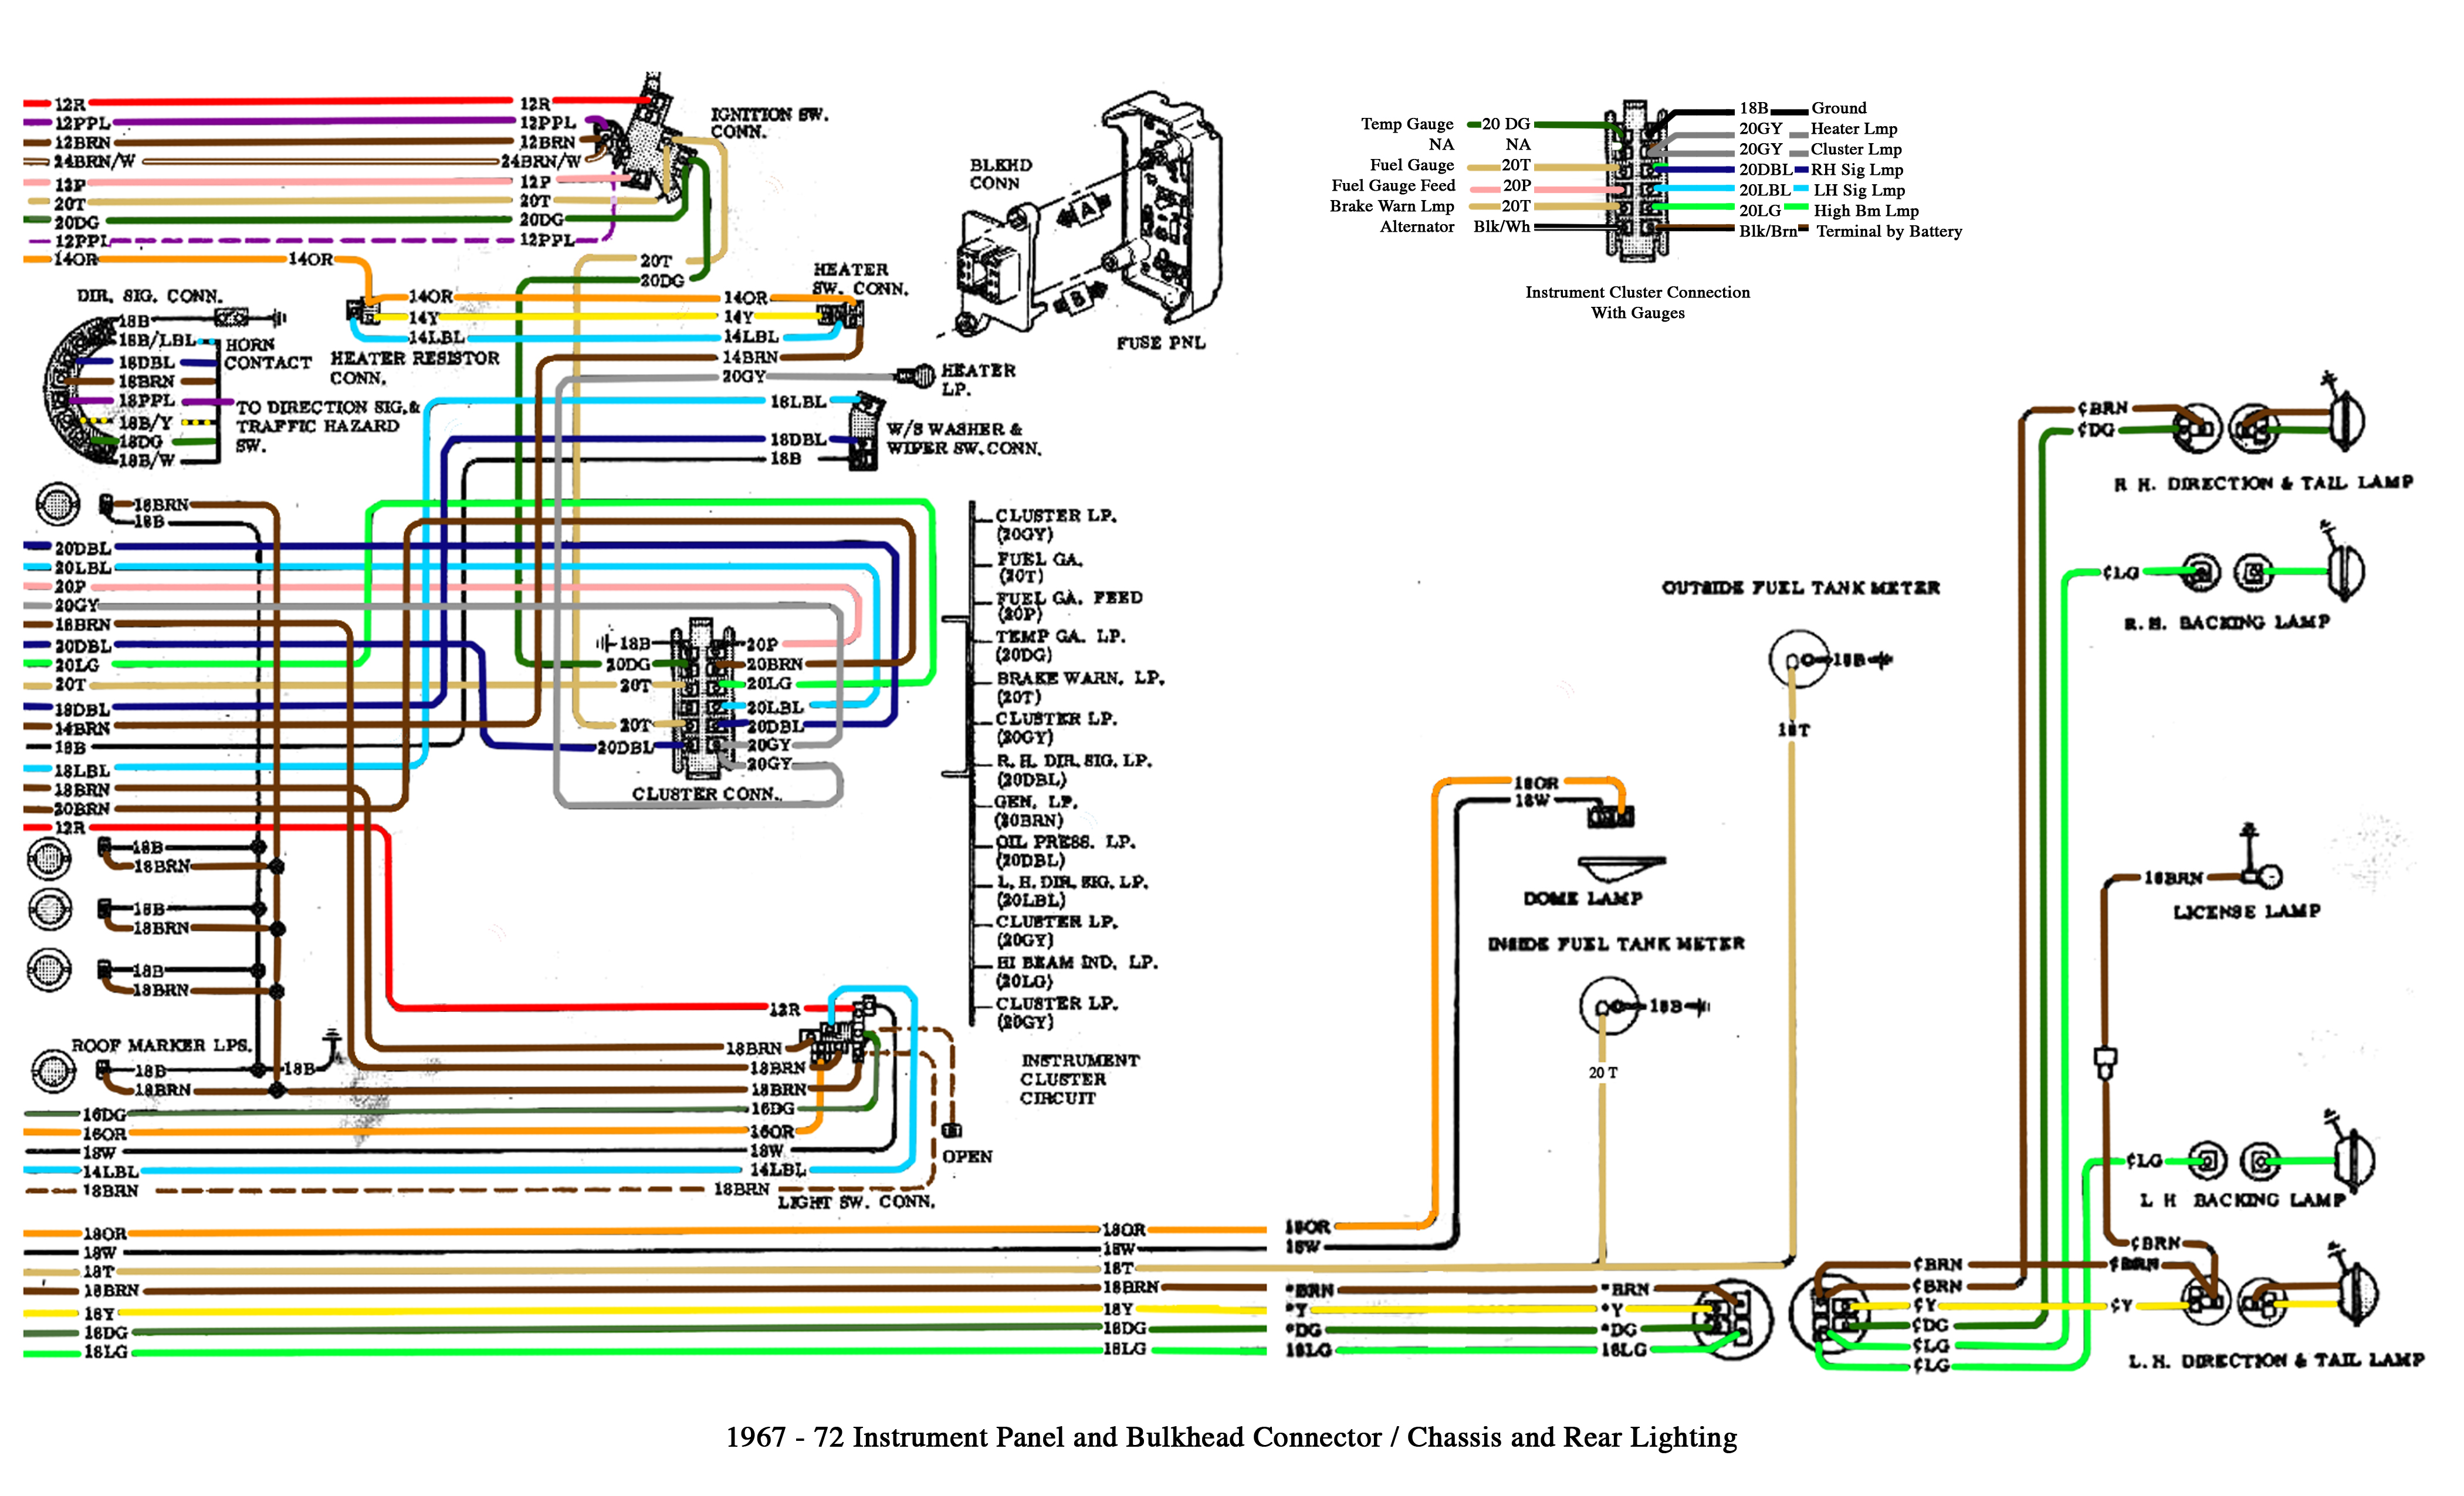 Color Wiring Diagram FINISHED - The 1947 - Present Chevrolet & GMC Truck  Message Board Network  73 87 Chevy Truck Radio Wiring Diagram    67-72 Chevy Trucks